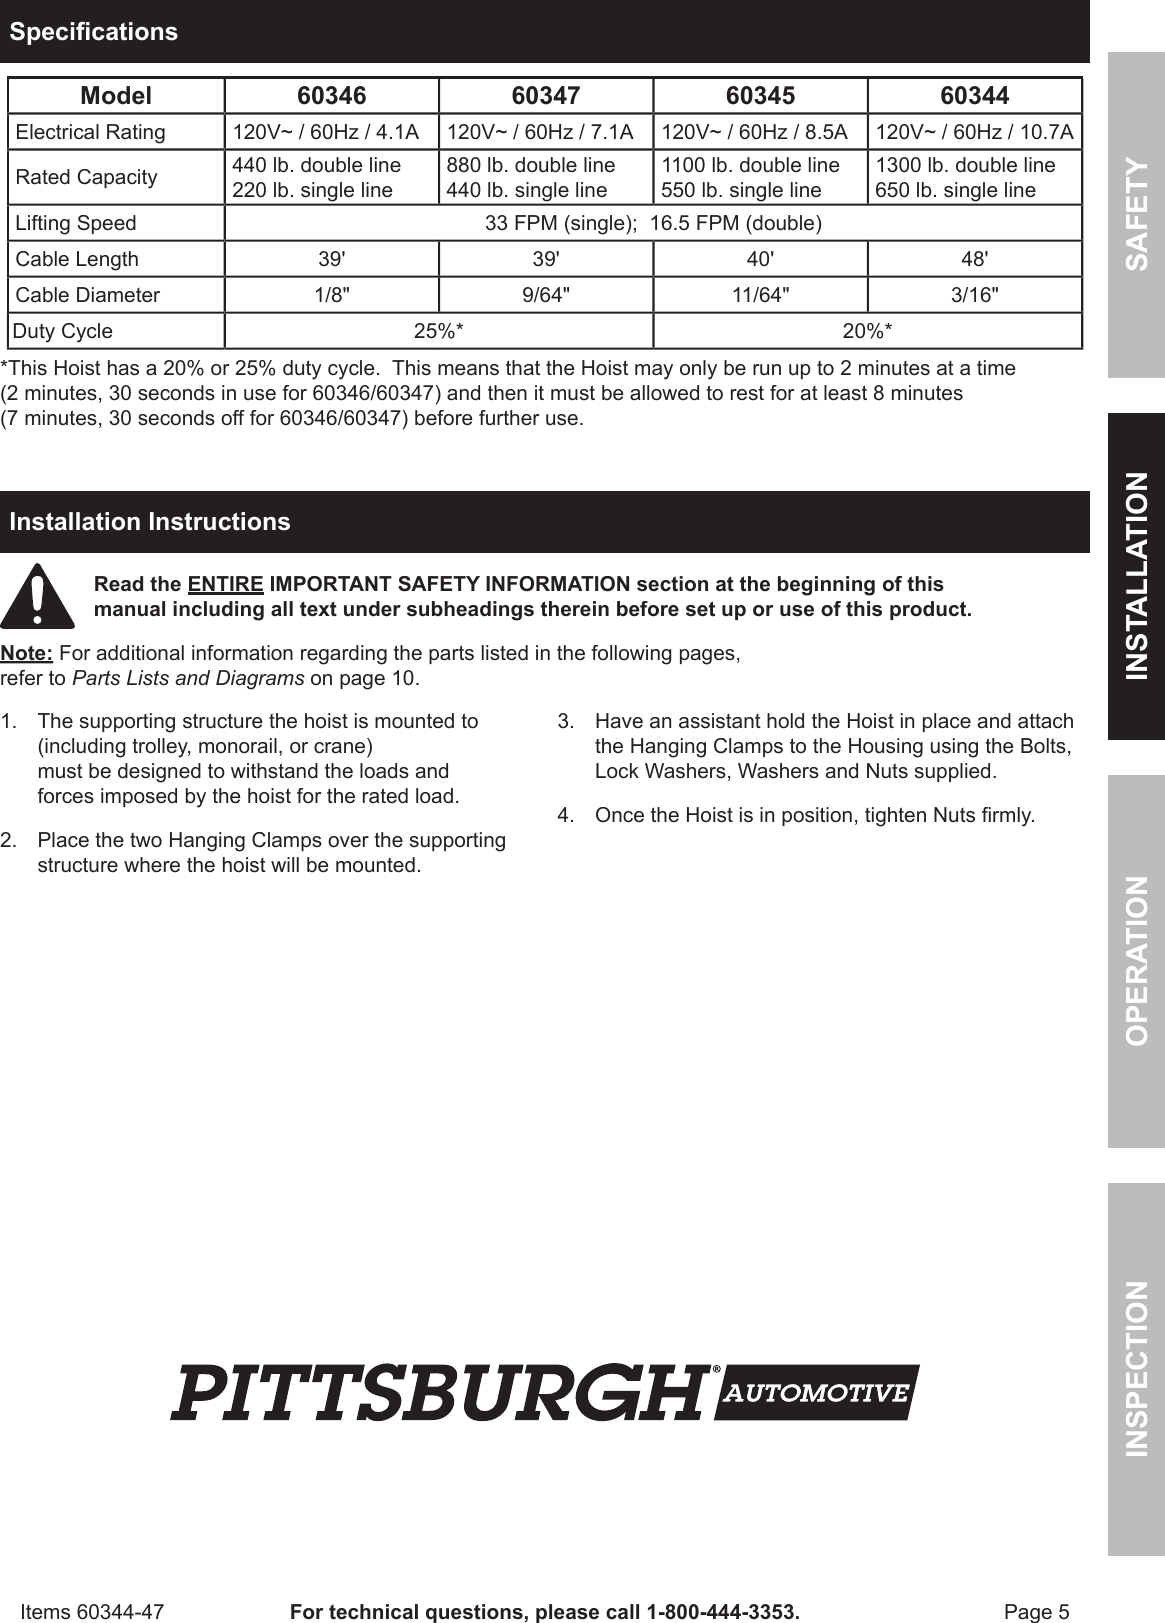 Page 5 of 12 - Harbor-Freight Harbor-Freight-1100-Lb-Electric-Hoist-With-Remote-Control-Product-Manual-  Harbor-freight-1100-lb-electric-hoist-with-remote-control-product-manual